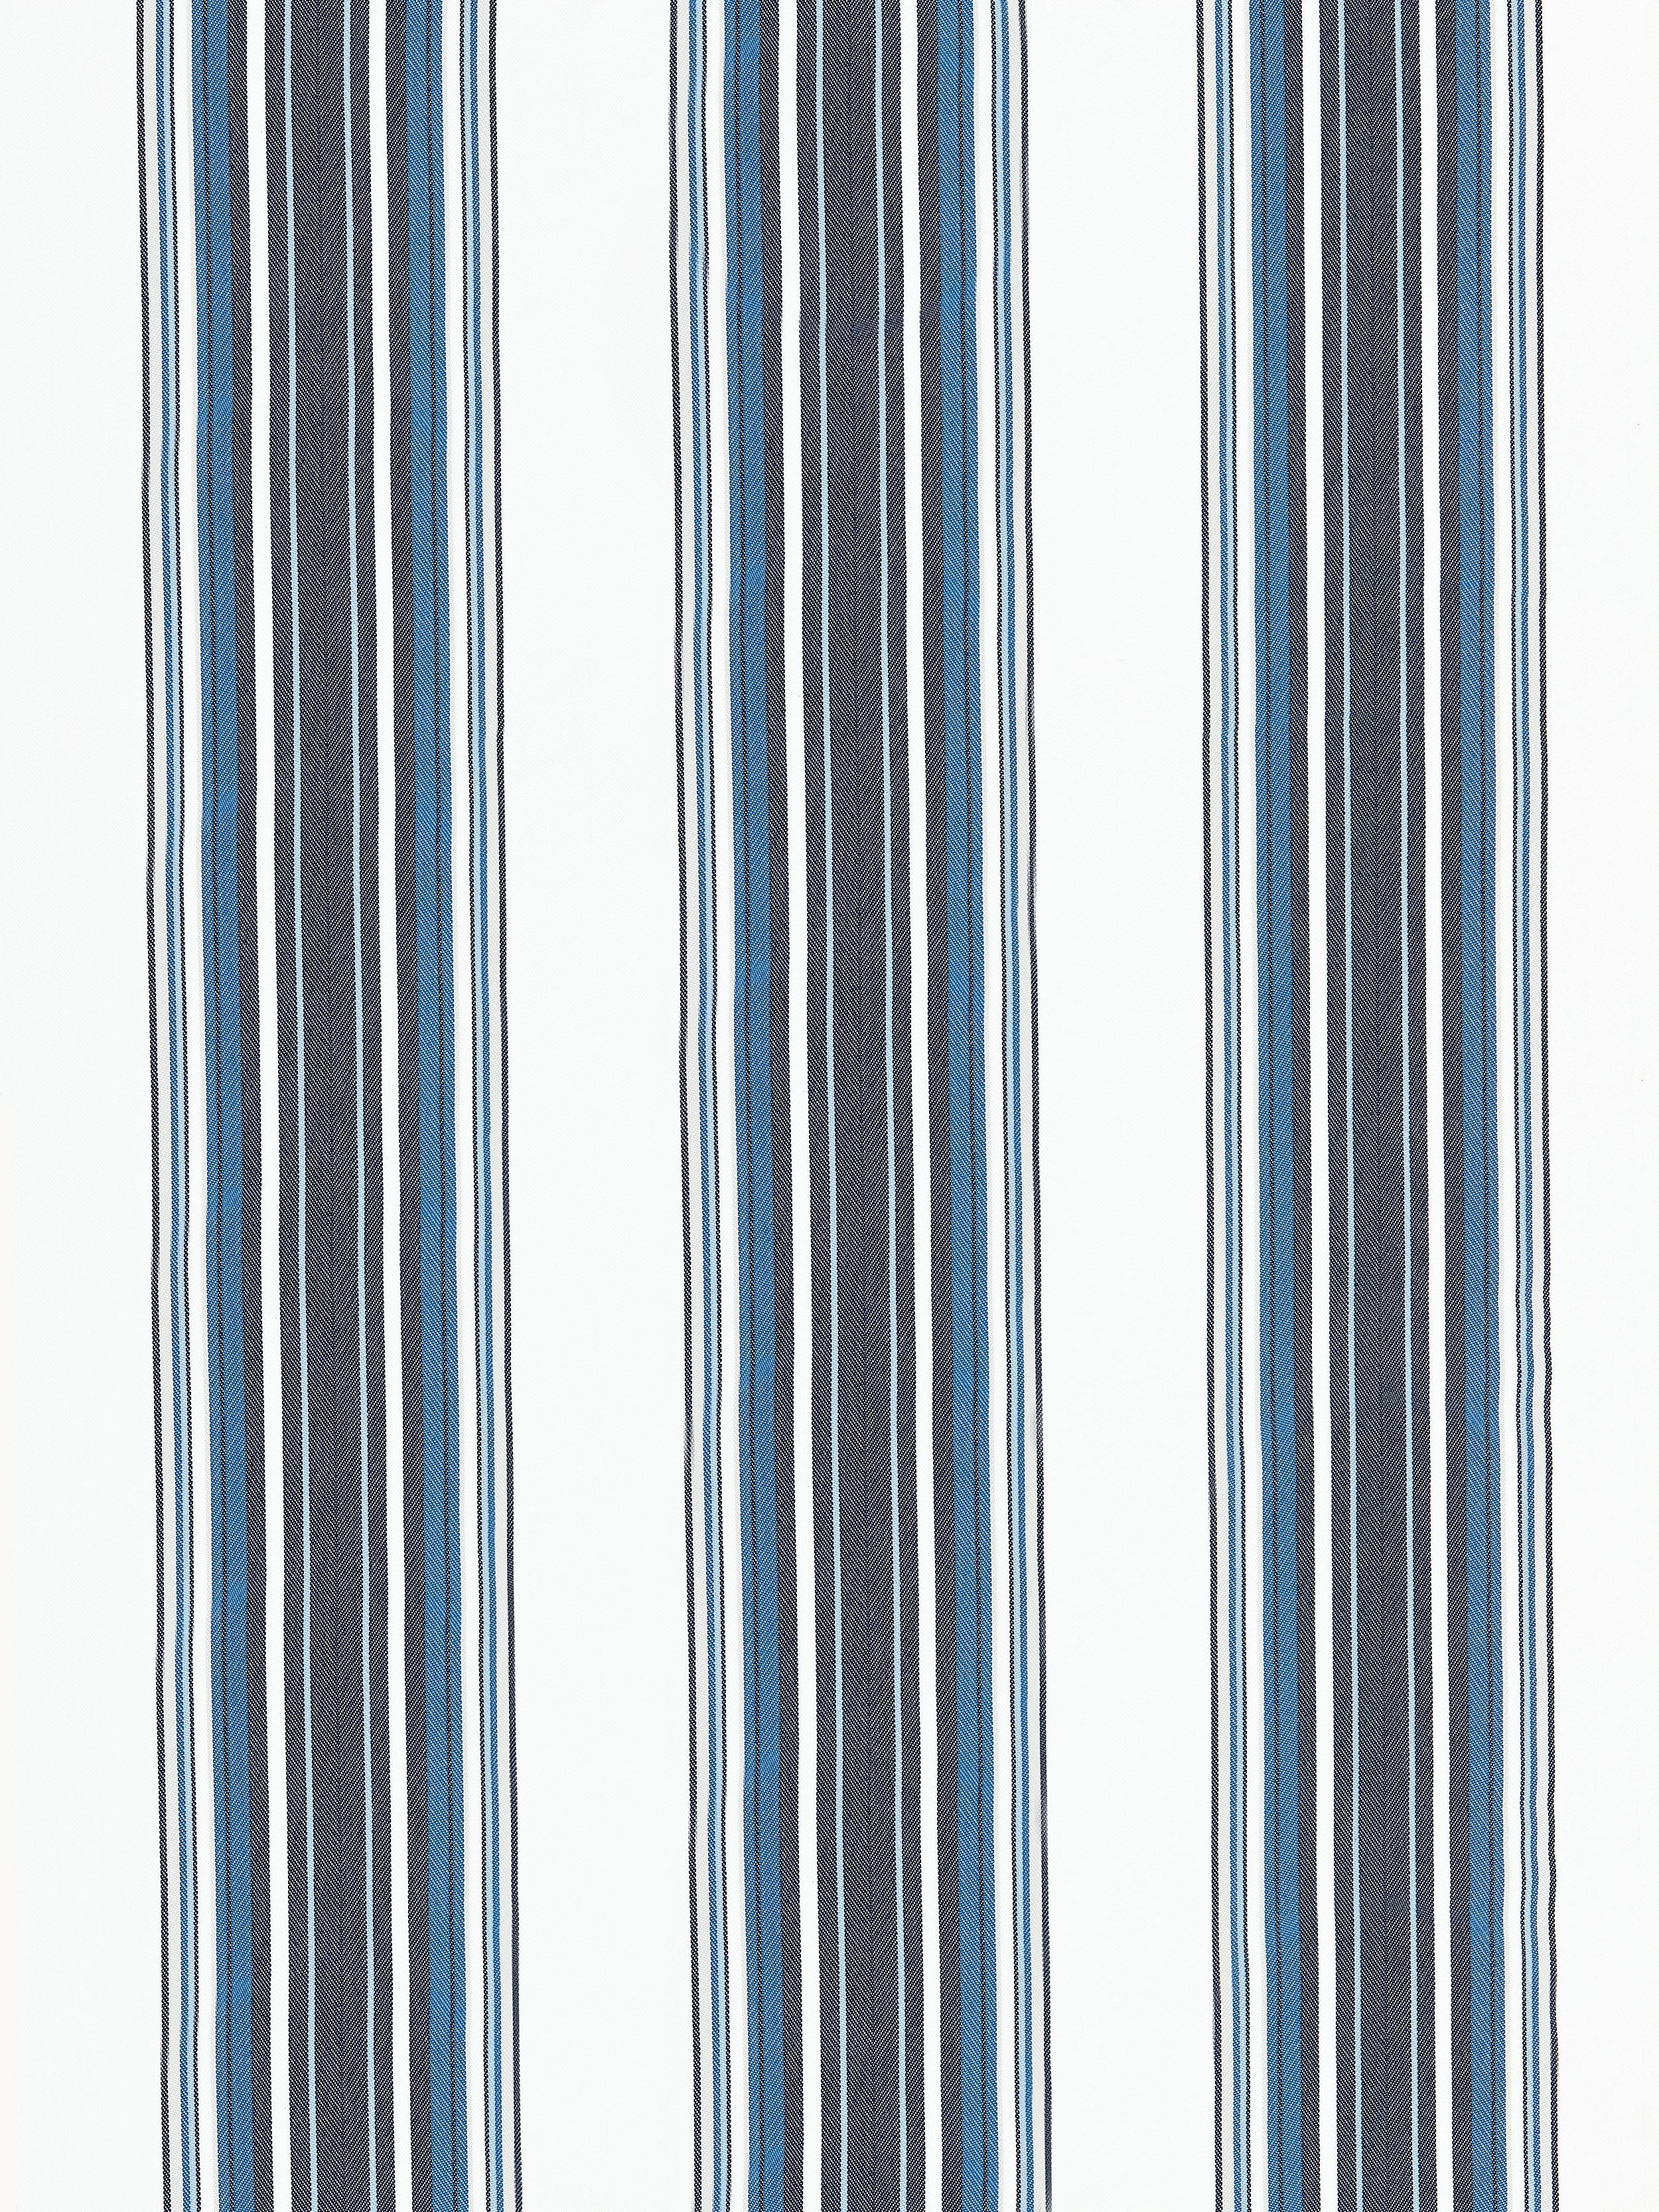 Cabana Stripe fabric in indigo color - pattern number SC 000227063 - by Scalamandre in the Scalamandre Fabrics Book 1 collection